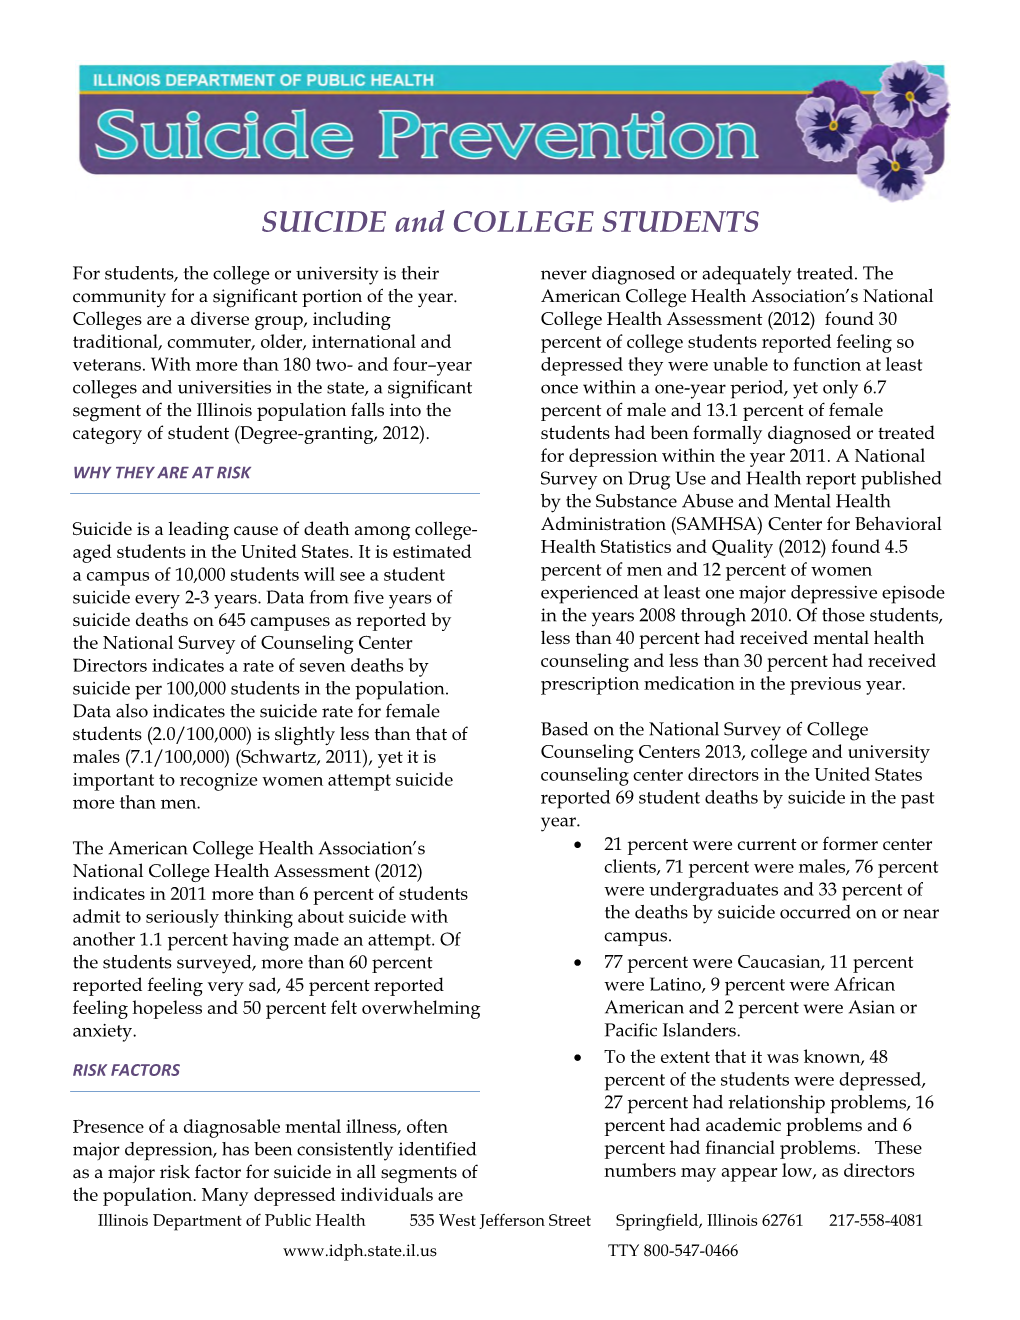 SUICIDE and COLLEGE STUDENTS